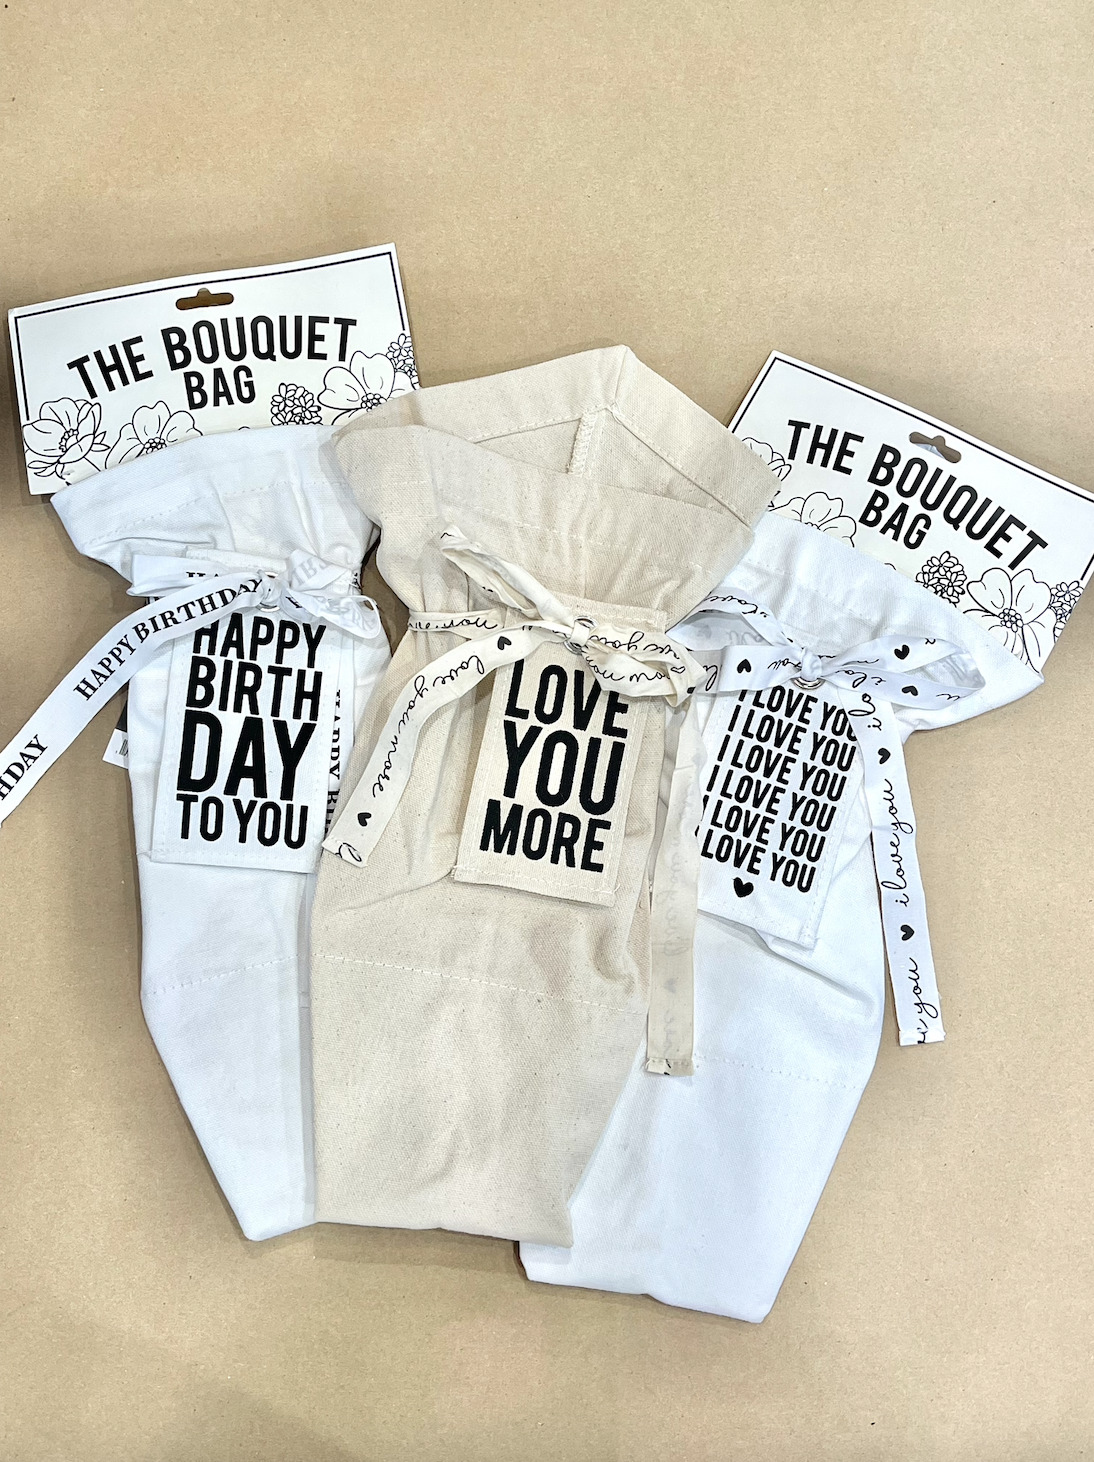 special occasion bouquet bags that say "happy birthday to you" and "love you more"